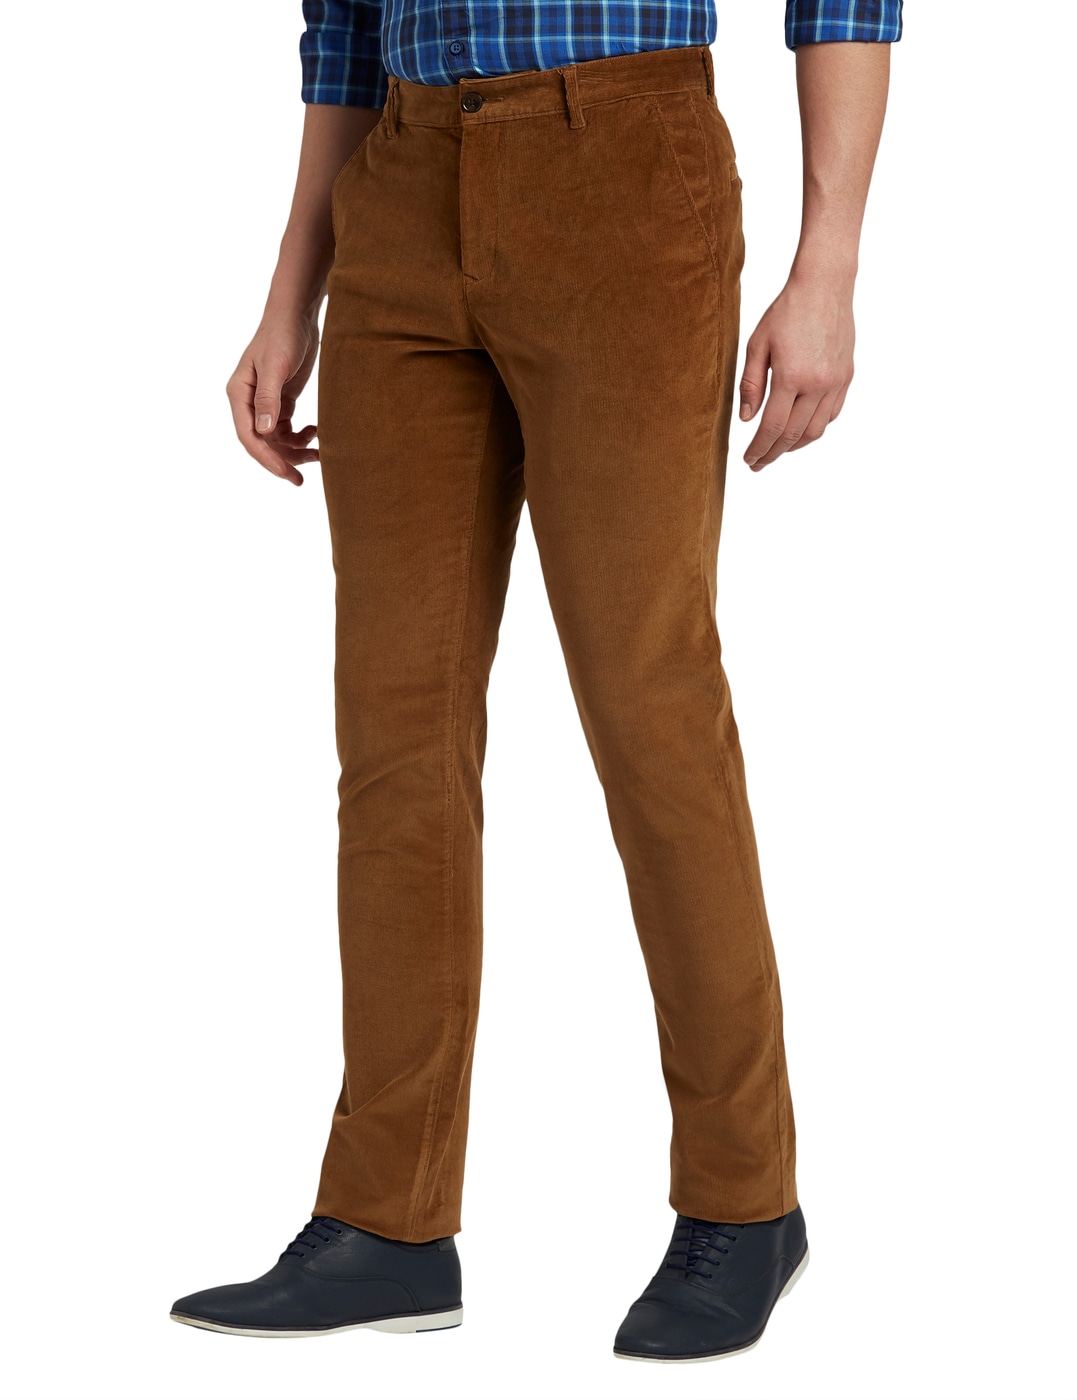 BASICS Casual Trousers  Buy BASICS Skinny Fit Falcon Brown Corduroy  Stretch Trousers Online  Nykaa Fashion